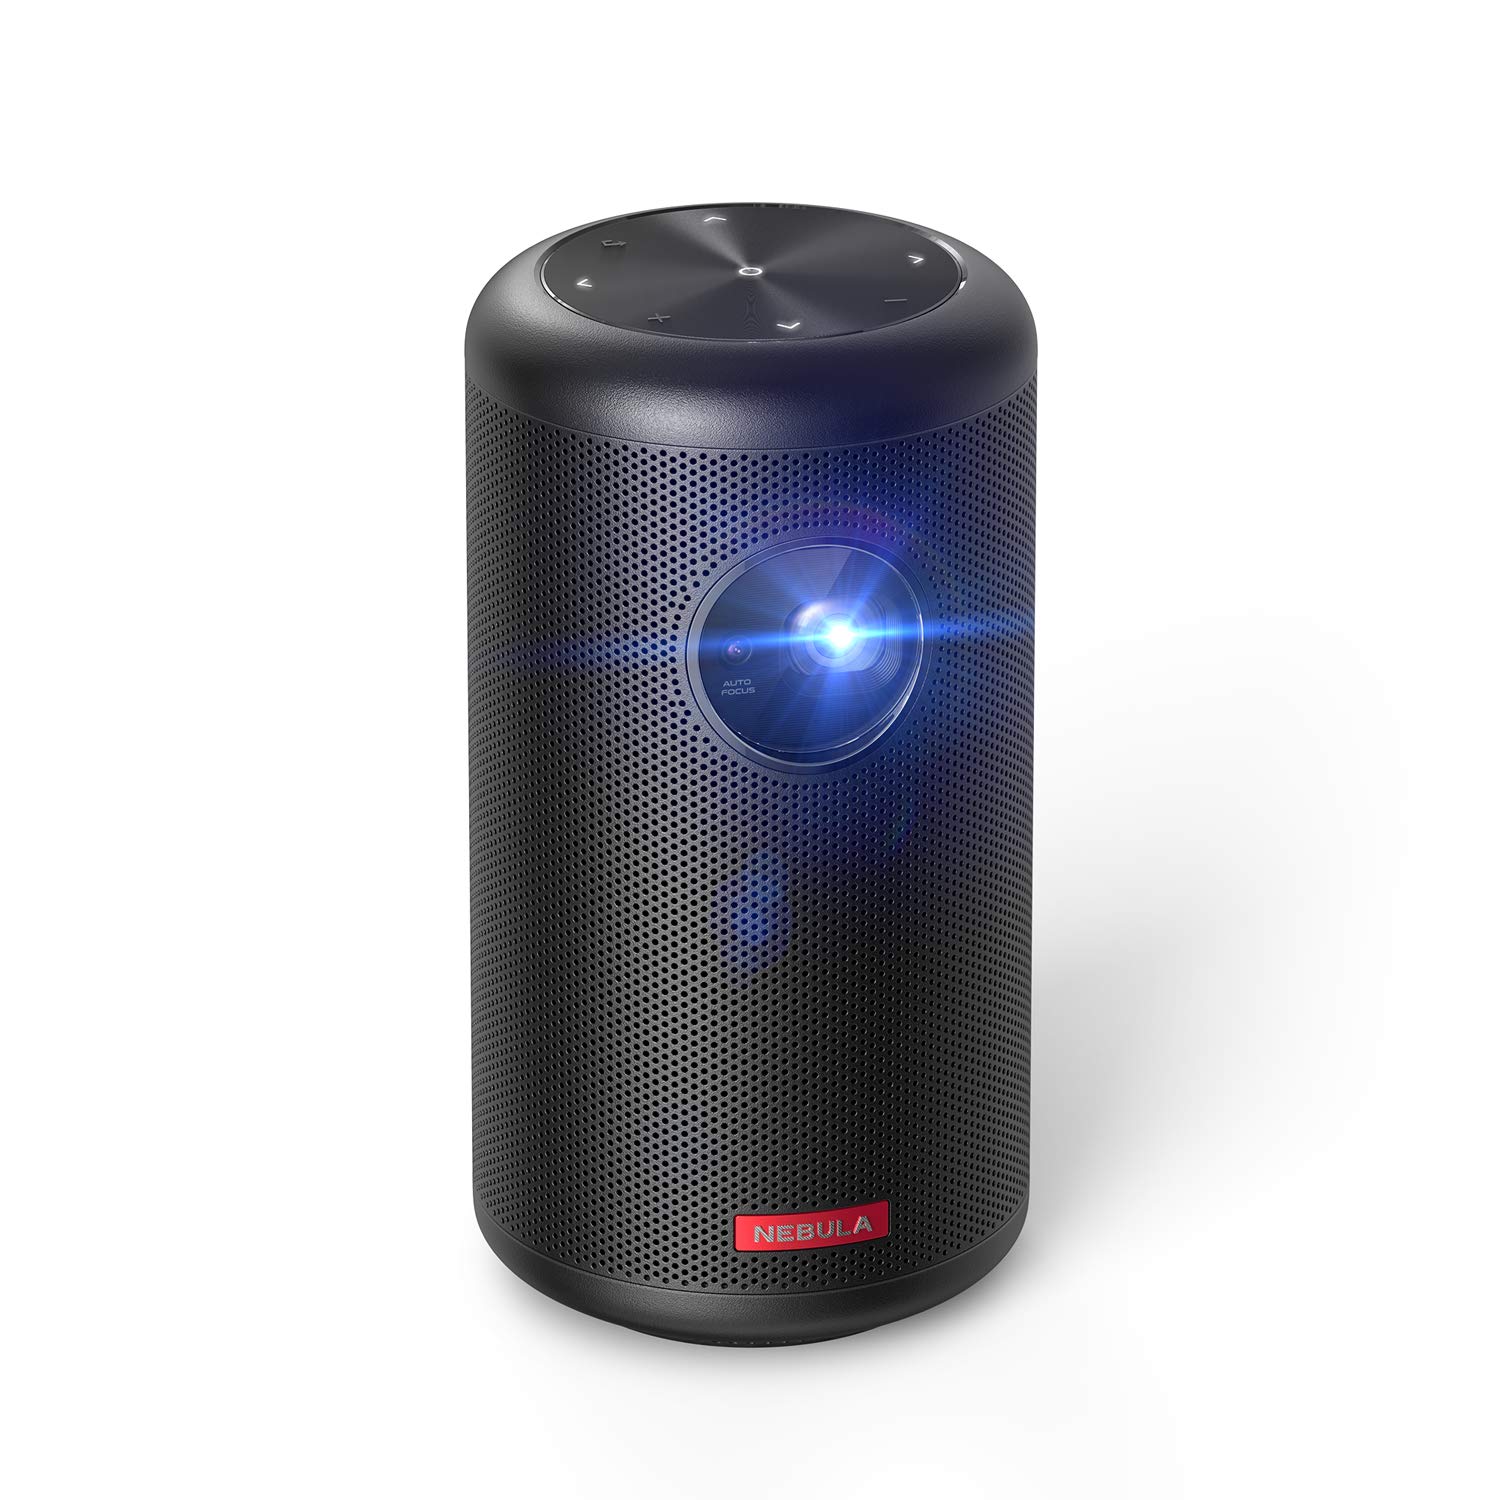 Nebula Capsule II Android TV projector goes on sale for $579